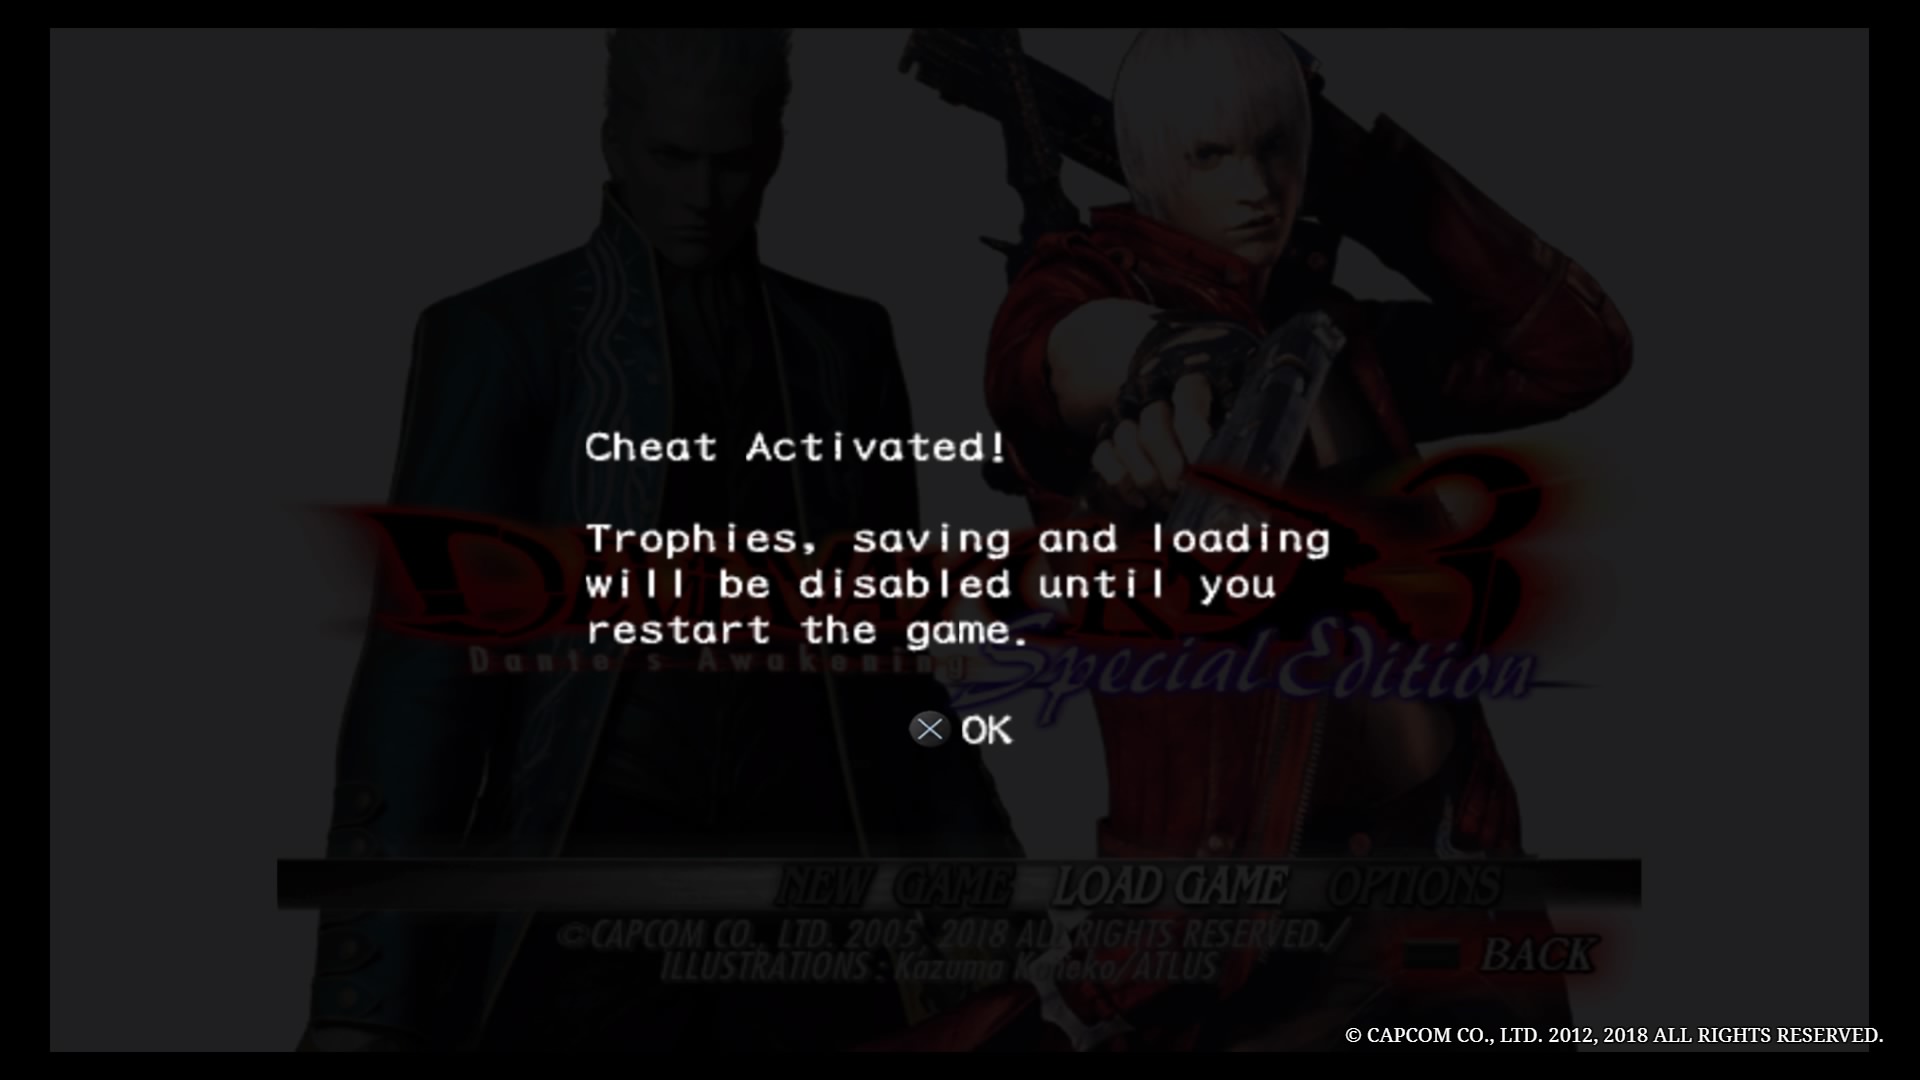 devil may cry hd collection cheats ps3